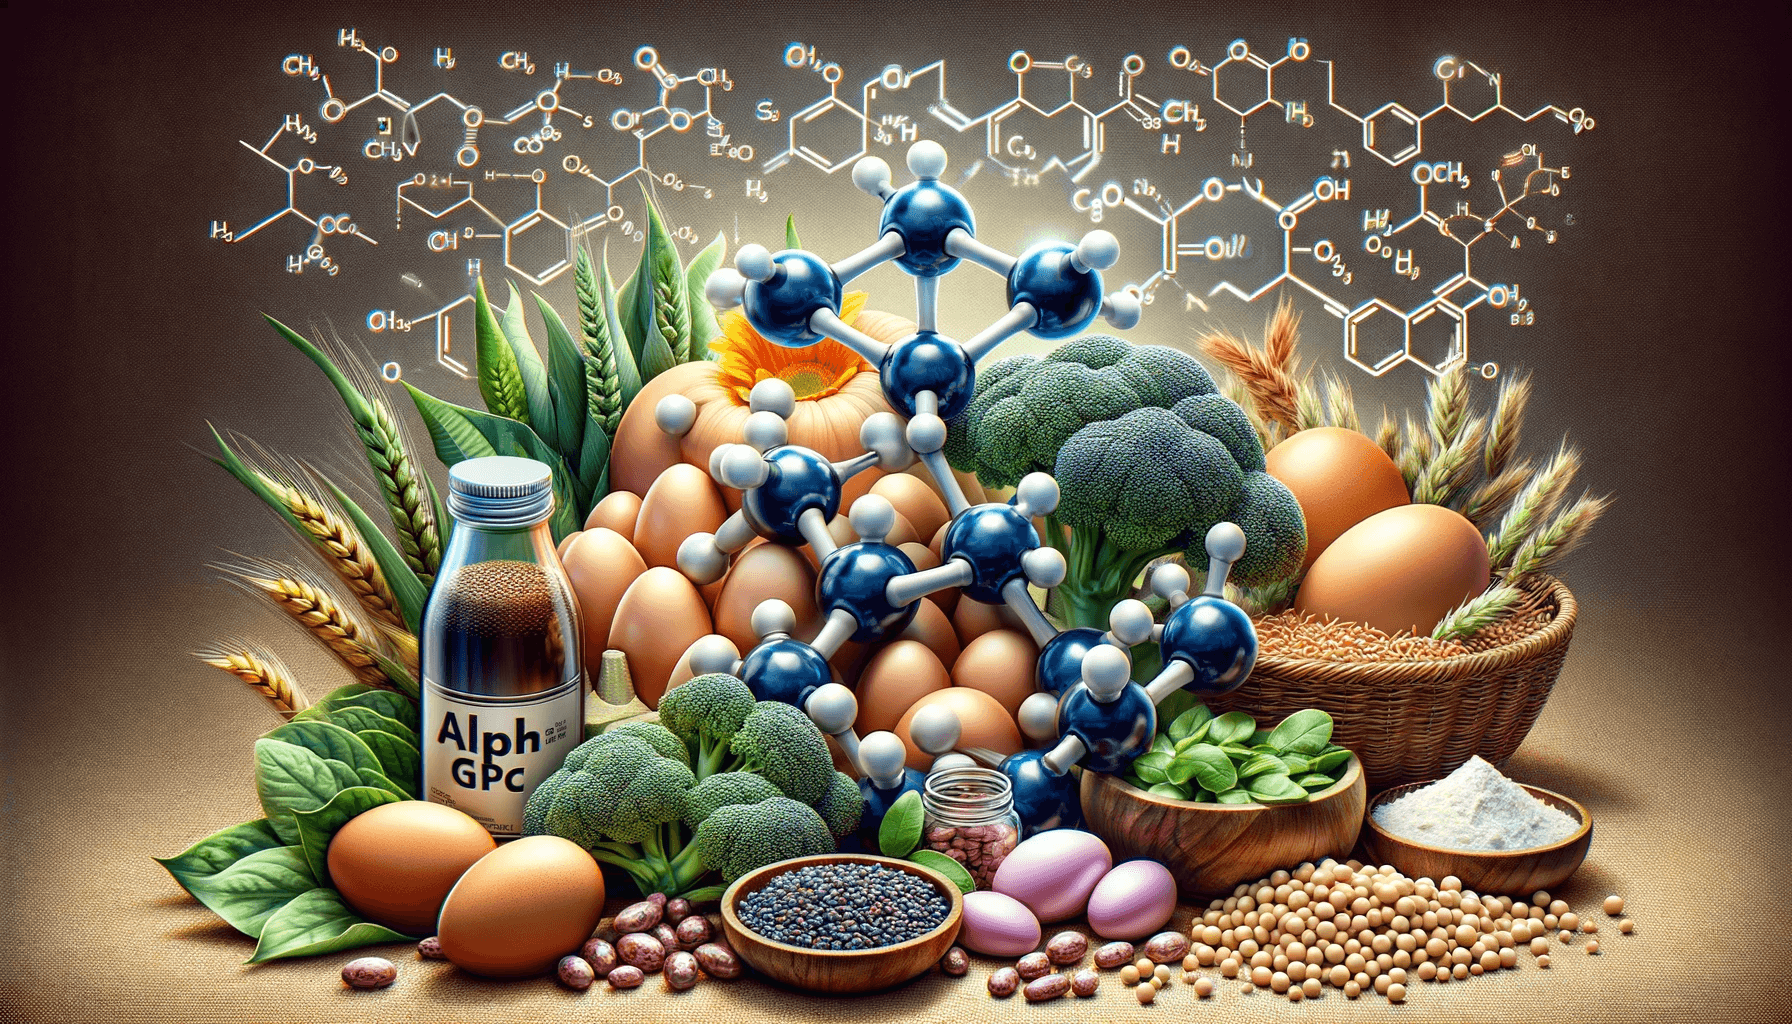 A detailed image showing the molecular structure of Alpha GPC alongside natural food sources and synthetic supplements.